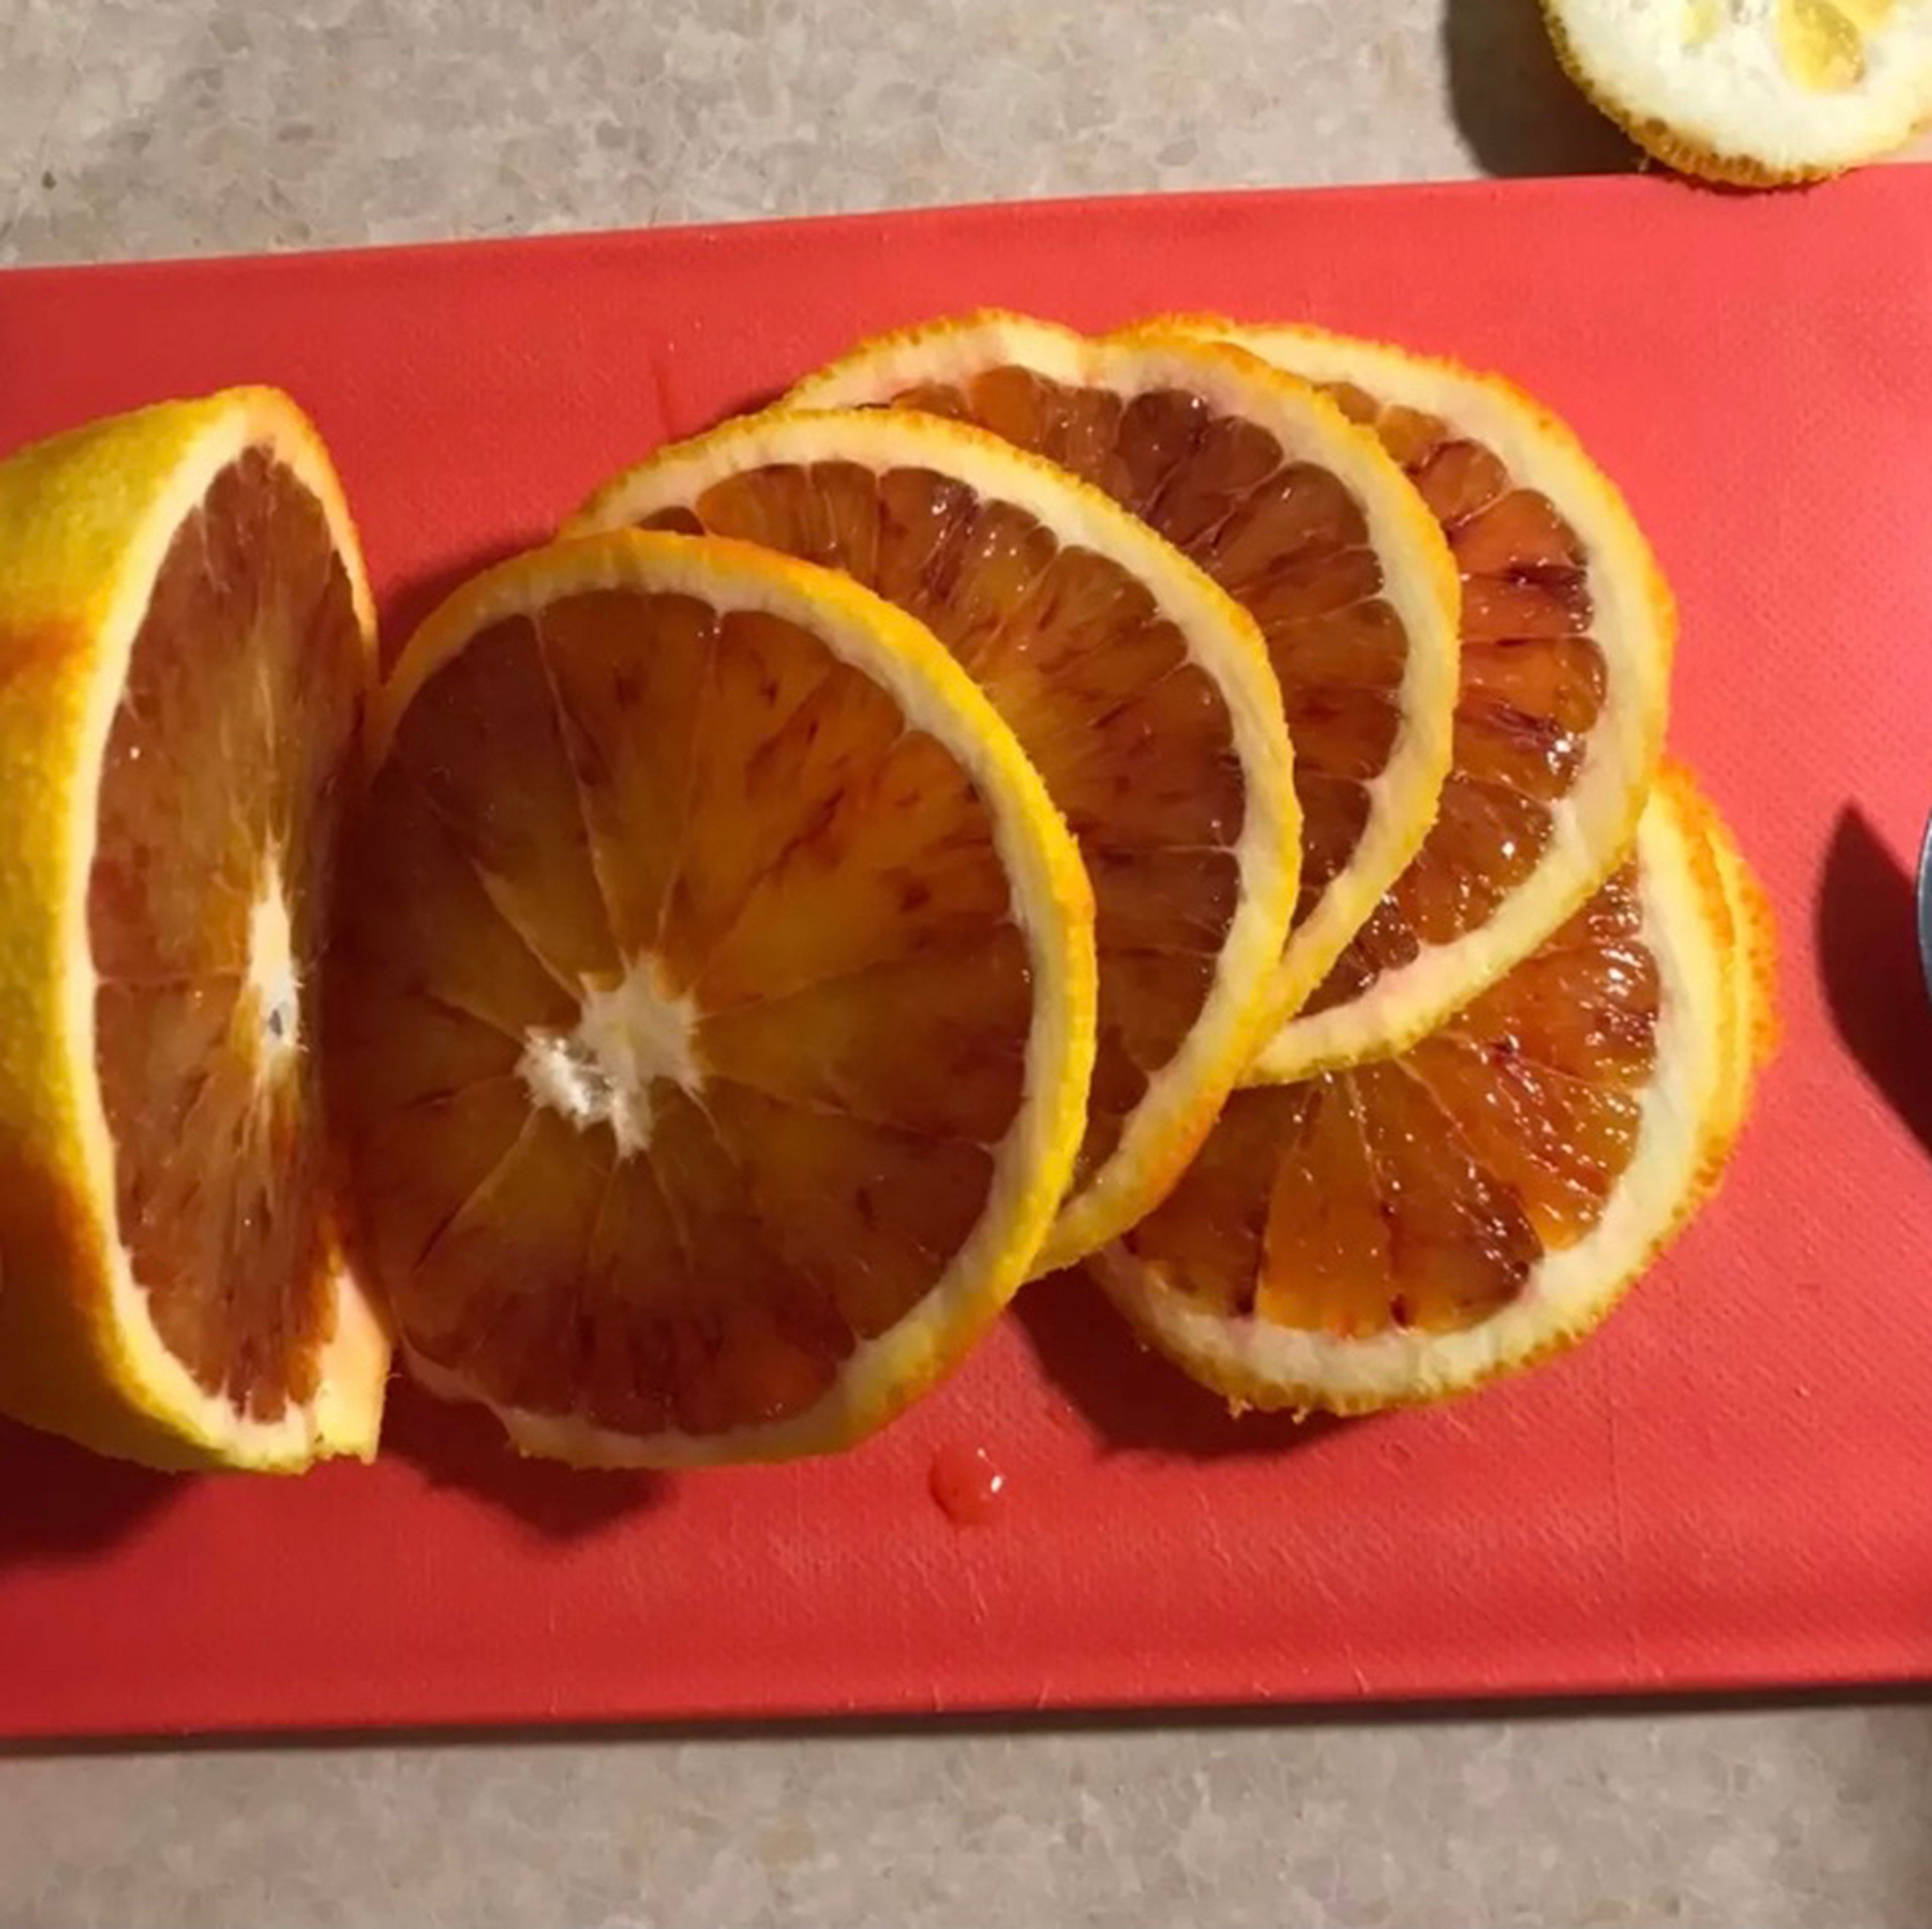 Then cut the orange peel into thin slices. Put it in the dish.